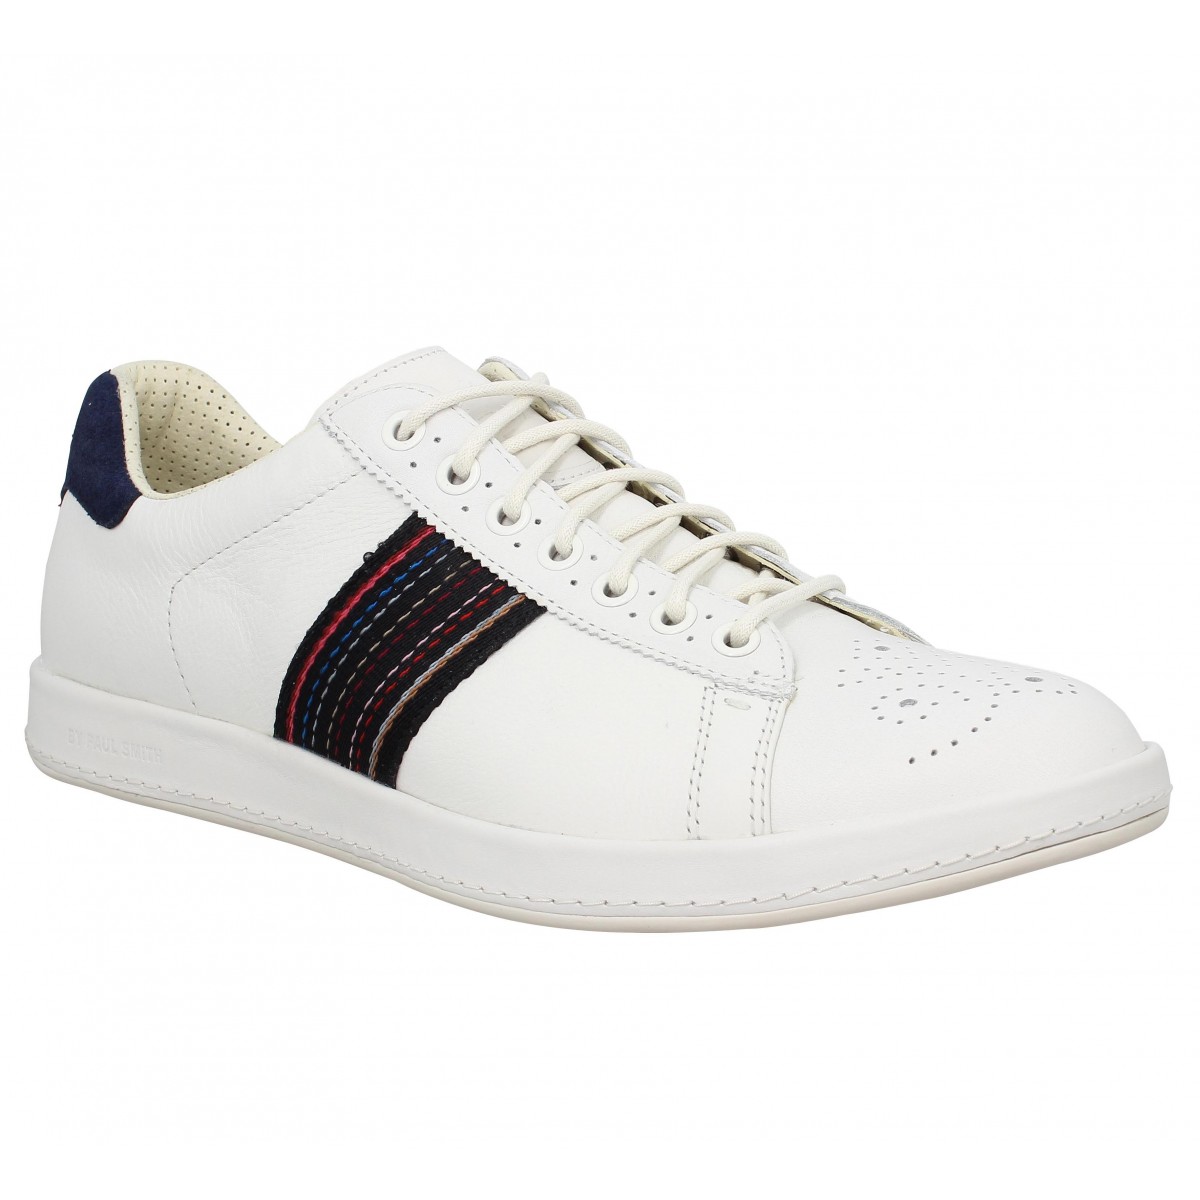 chaussures paul smith soldes